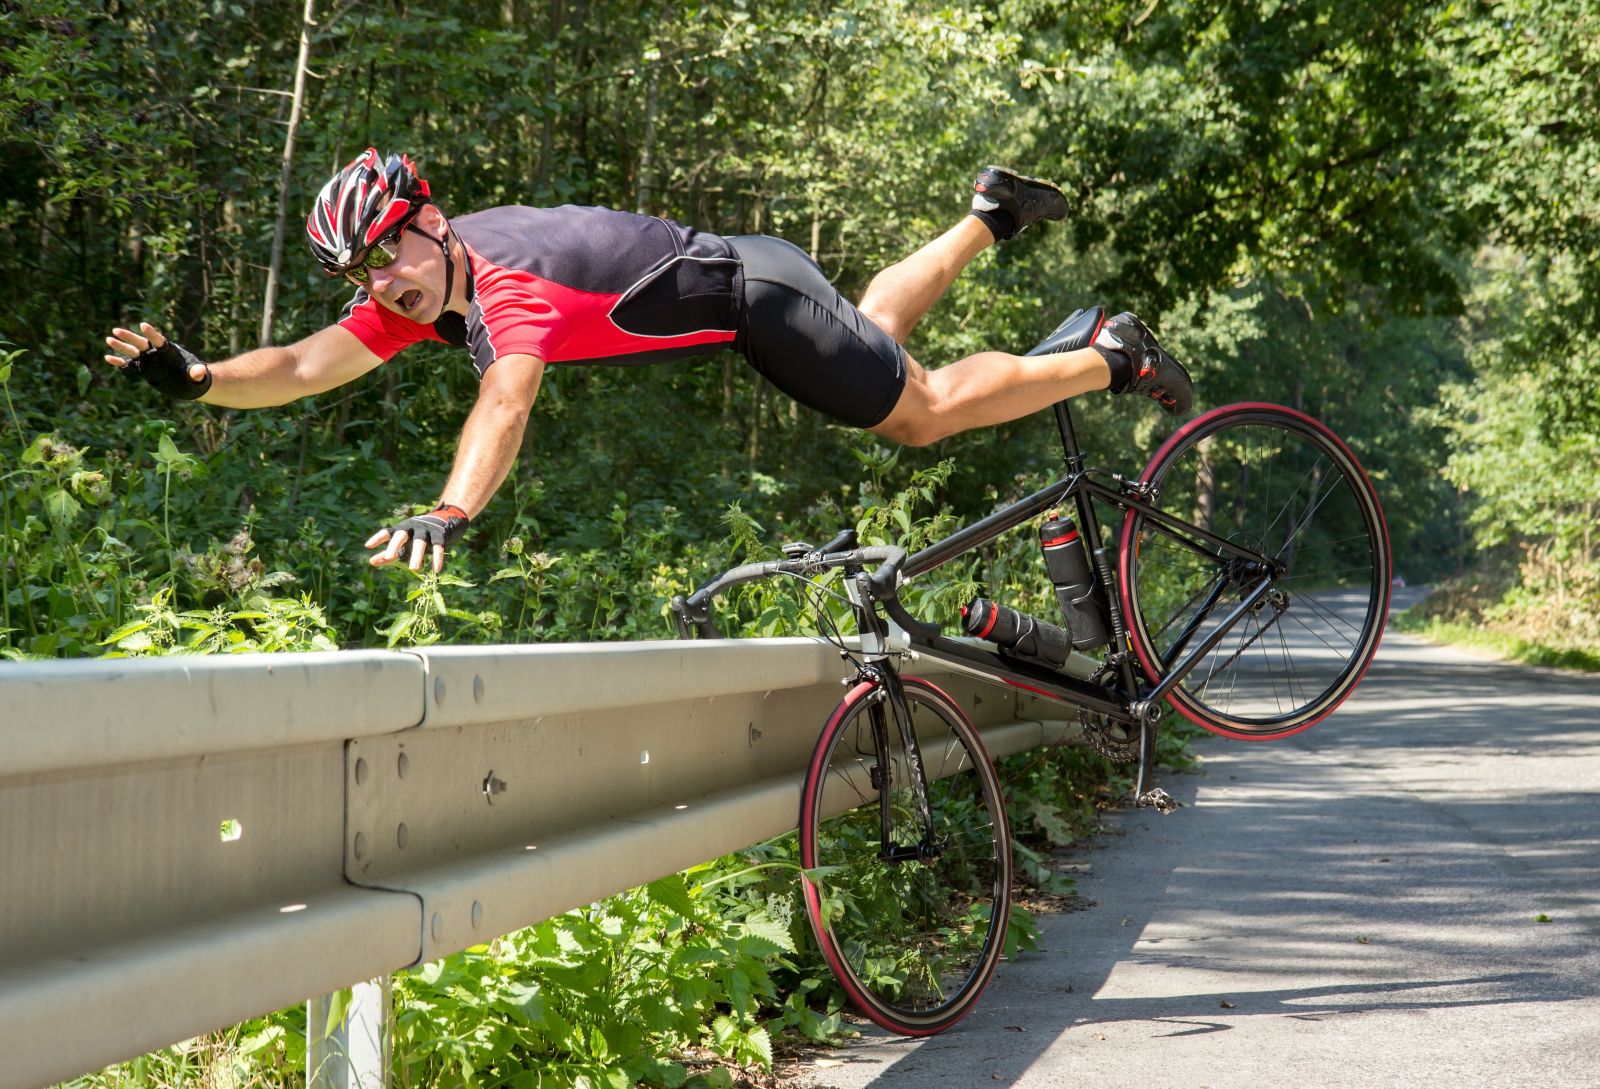 Cyclist flying over a road barrier in an accident from a flipped bike » HCi